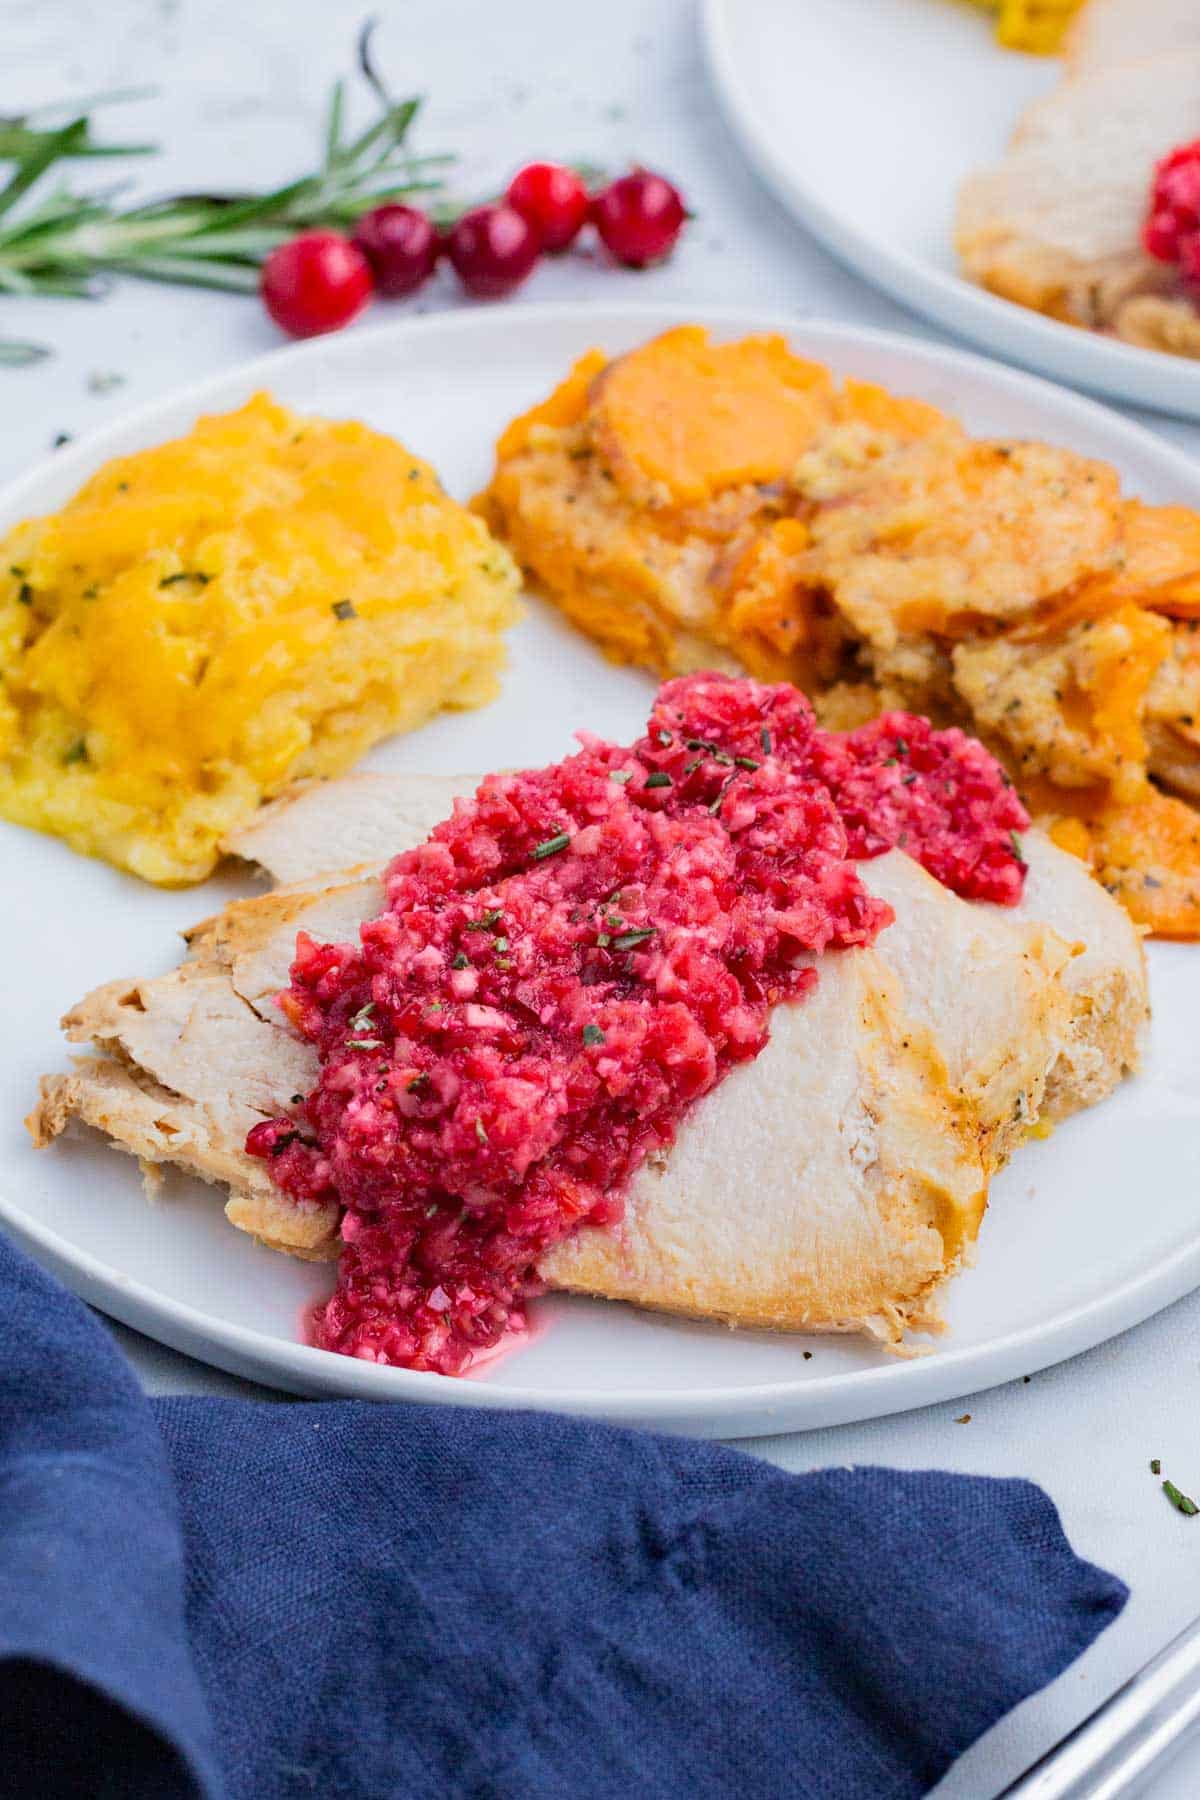 Orange cranberry relish is served over turkey at a holiday meal.